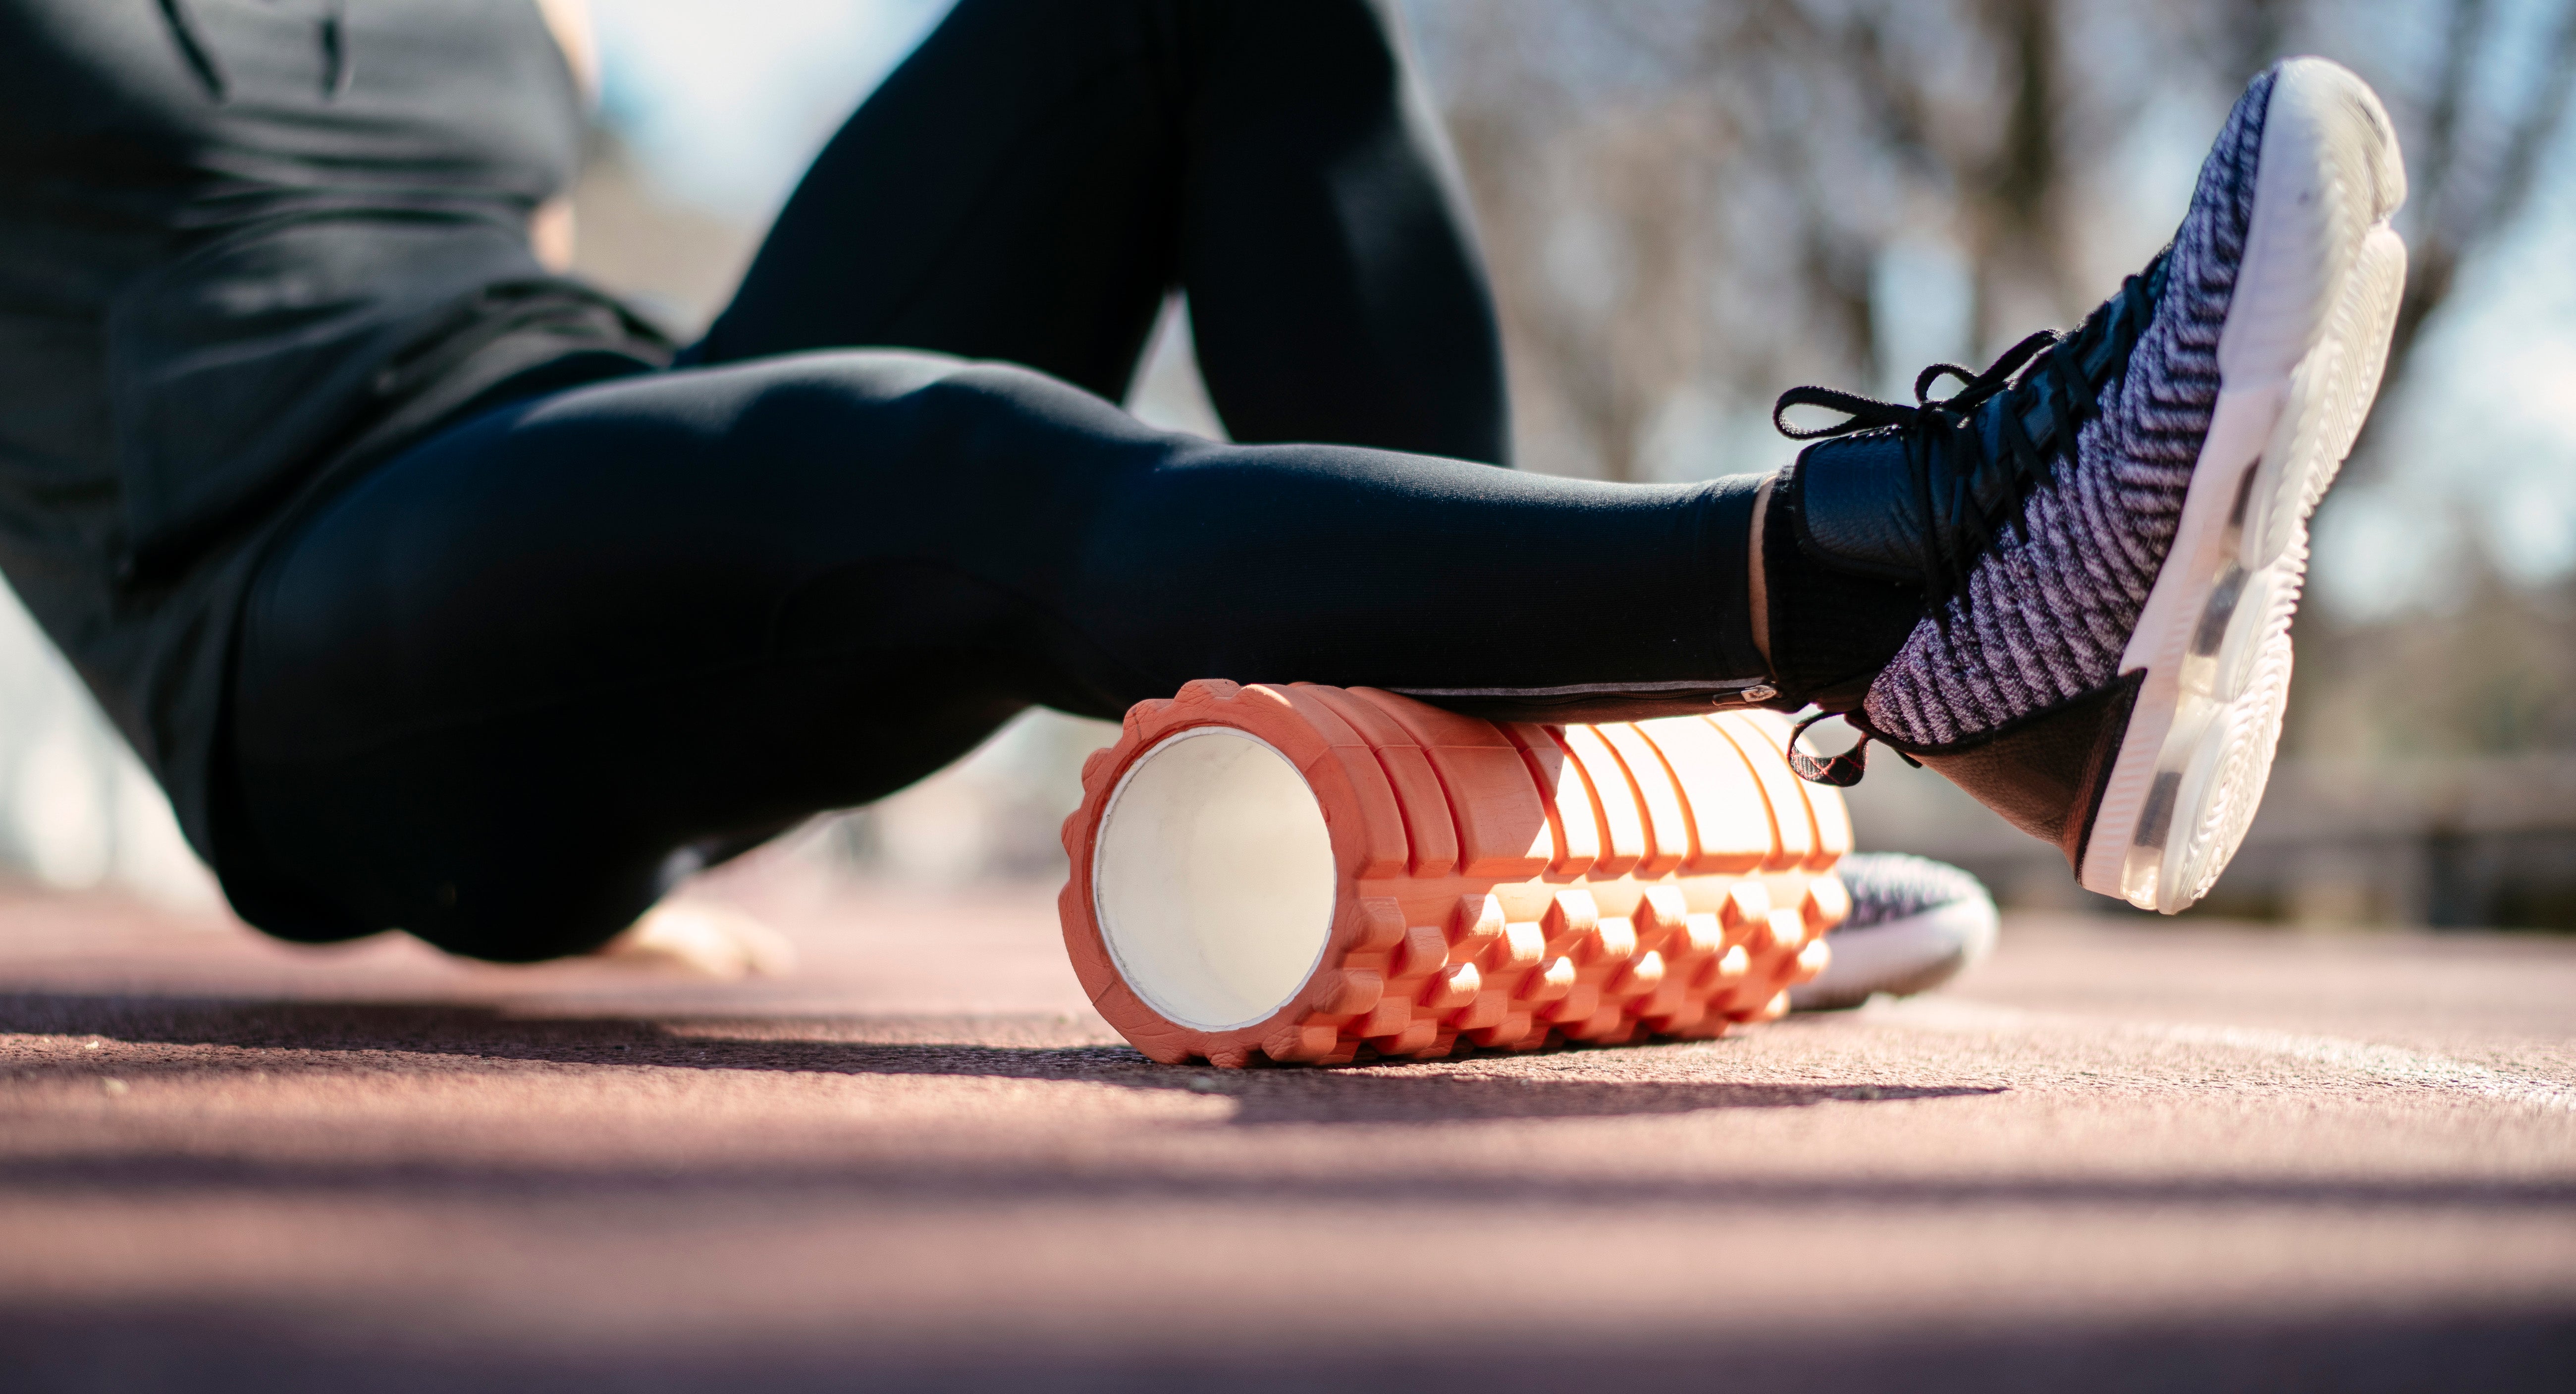 Total Body Foam Rolling Workout with Stretching Breaks